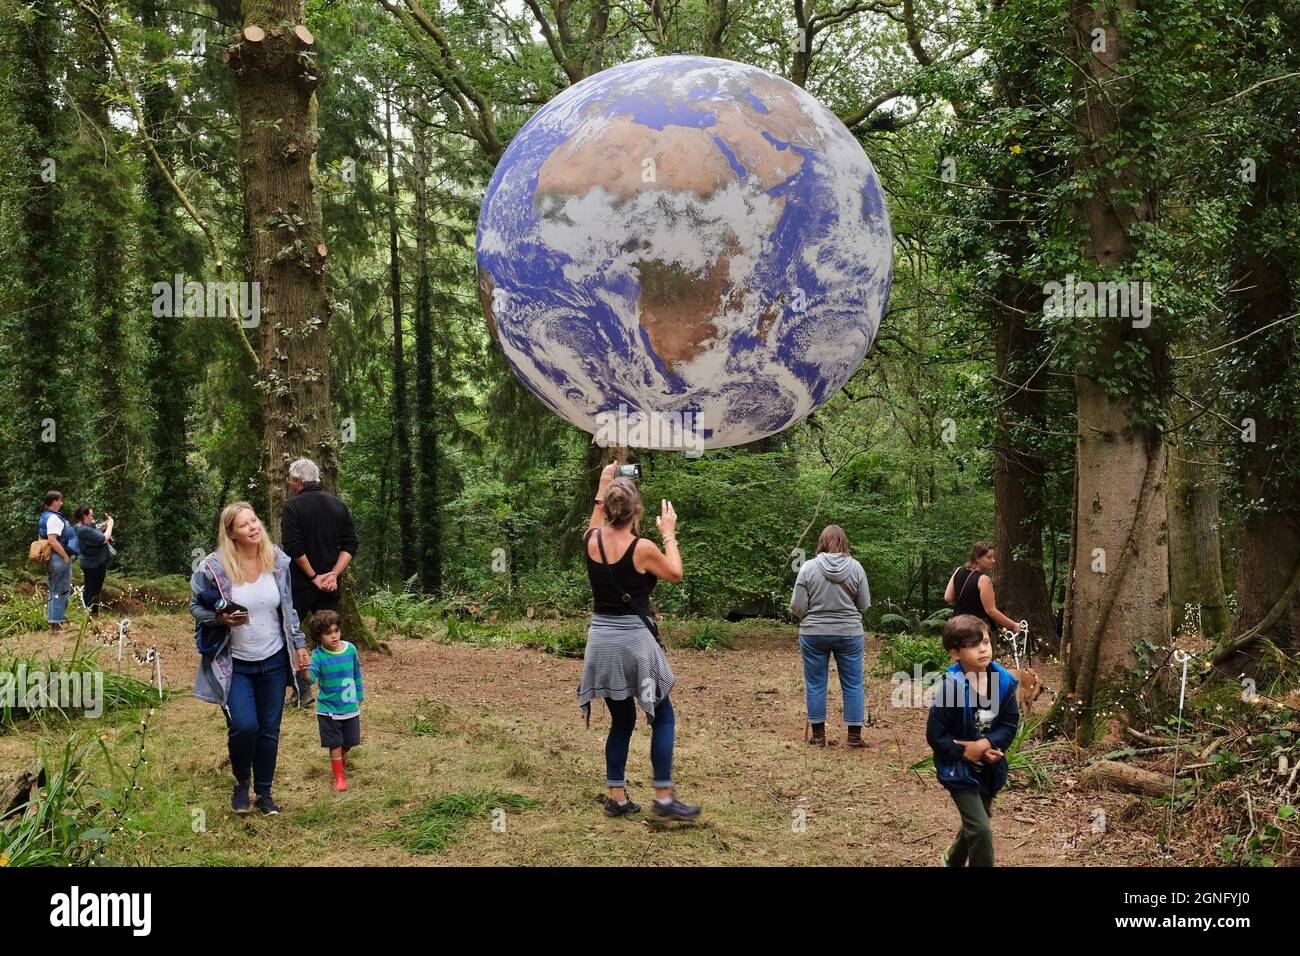 Gaia Artwork, Symondsbury, Dorset, UK. 25th Sep, 2021. Visitors contemplate a representation of the earth suspended in woodland in Symondsbury Dorset. Measuring seven metres in diameter, Artist Luke Jerram's Gaia features 120dpi detailed NASA imagery of the Earth's surface and provides visitors the opportunity to see our planet like never before. Credit: Tom Corban/Alamy Live News Stock Photo